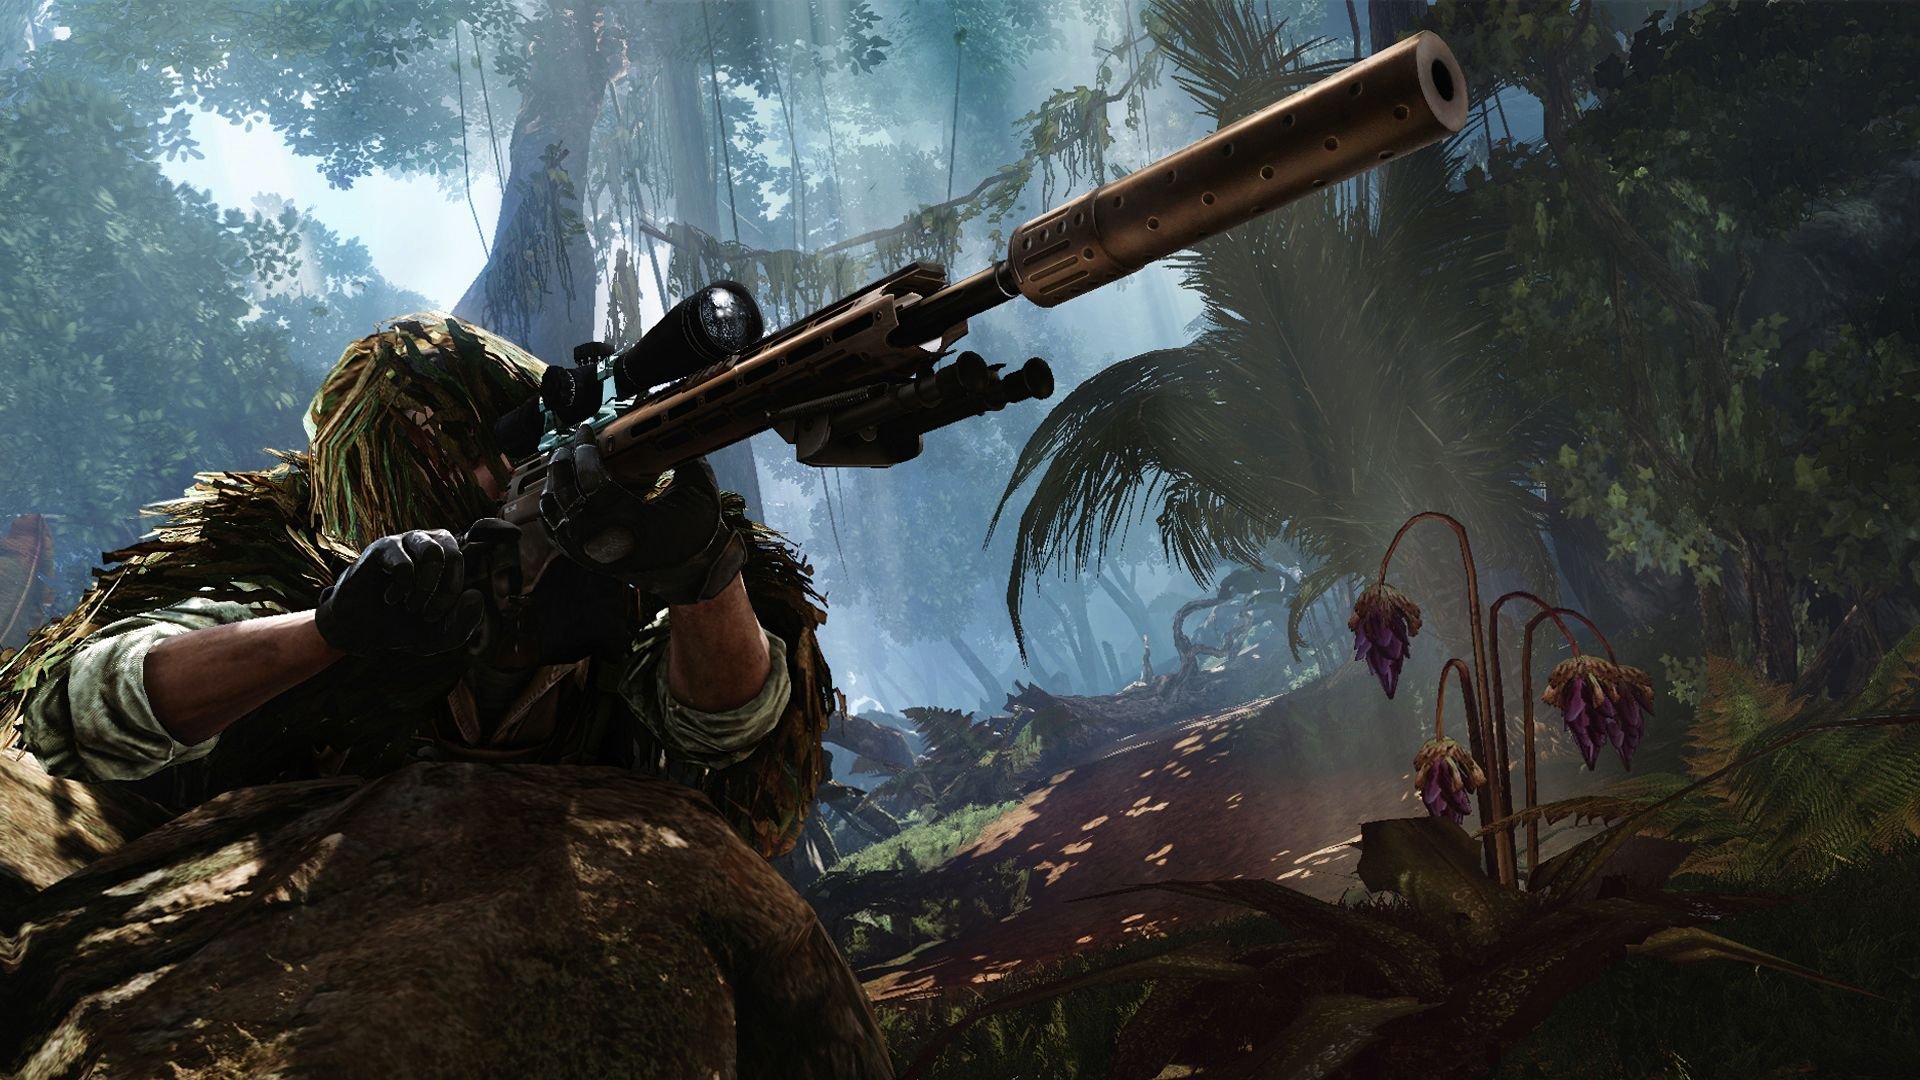 Free download Sniper Ghost Warrior 3 Wallpaper Image Photo Picture [1920x1080] for your Desktop, Mobile & Tablet. Explore Sniper Wallpaper. Sniper Gun Wallpaper, HD Sniper Wallpaper, Call of Duty Sniper Wallpaper